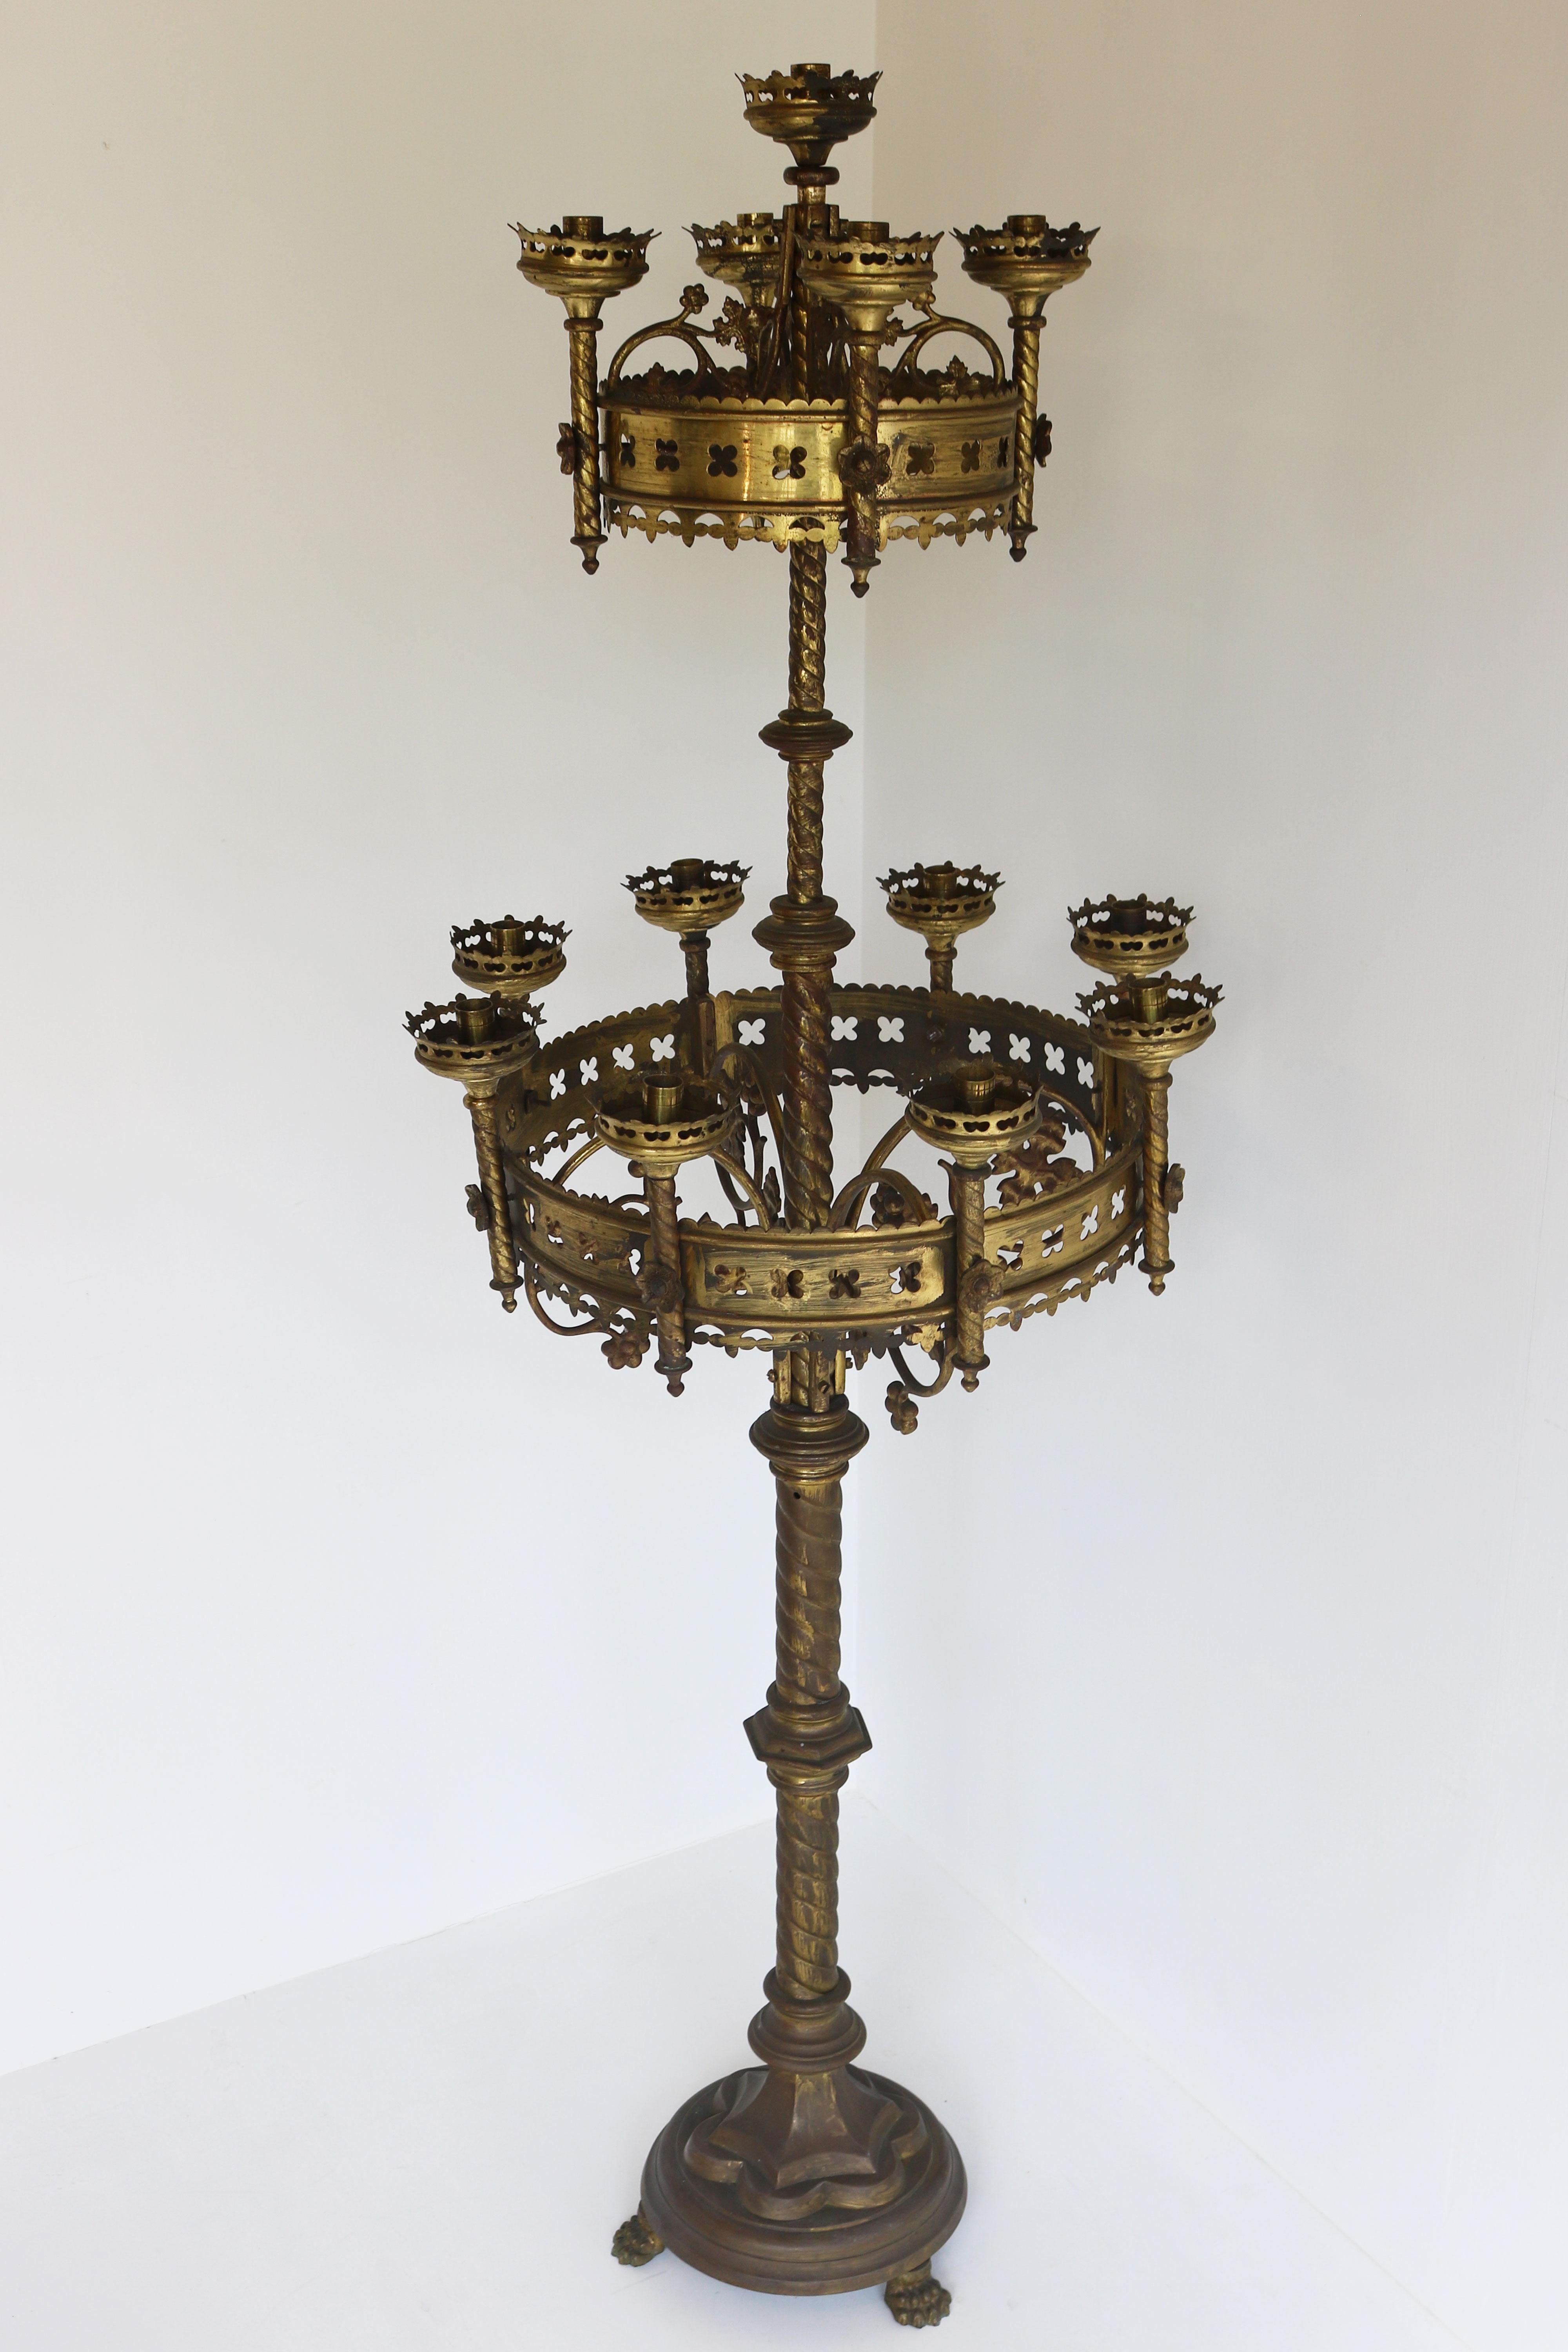 Large Antique Gothic Revival Church Candelabras 19th Century Brass Candlestick For Sale 7